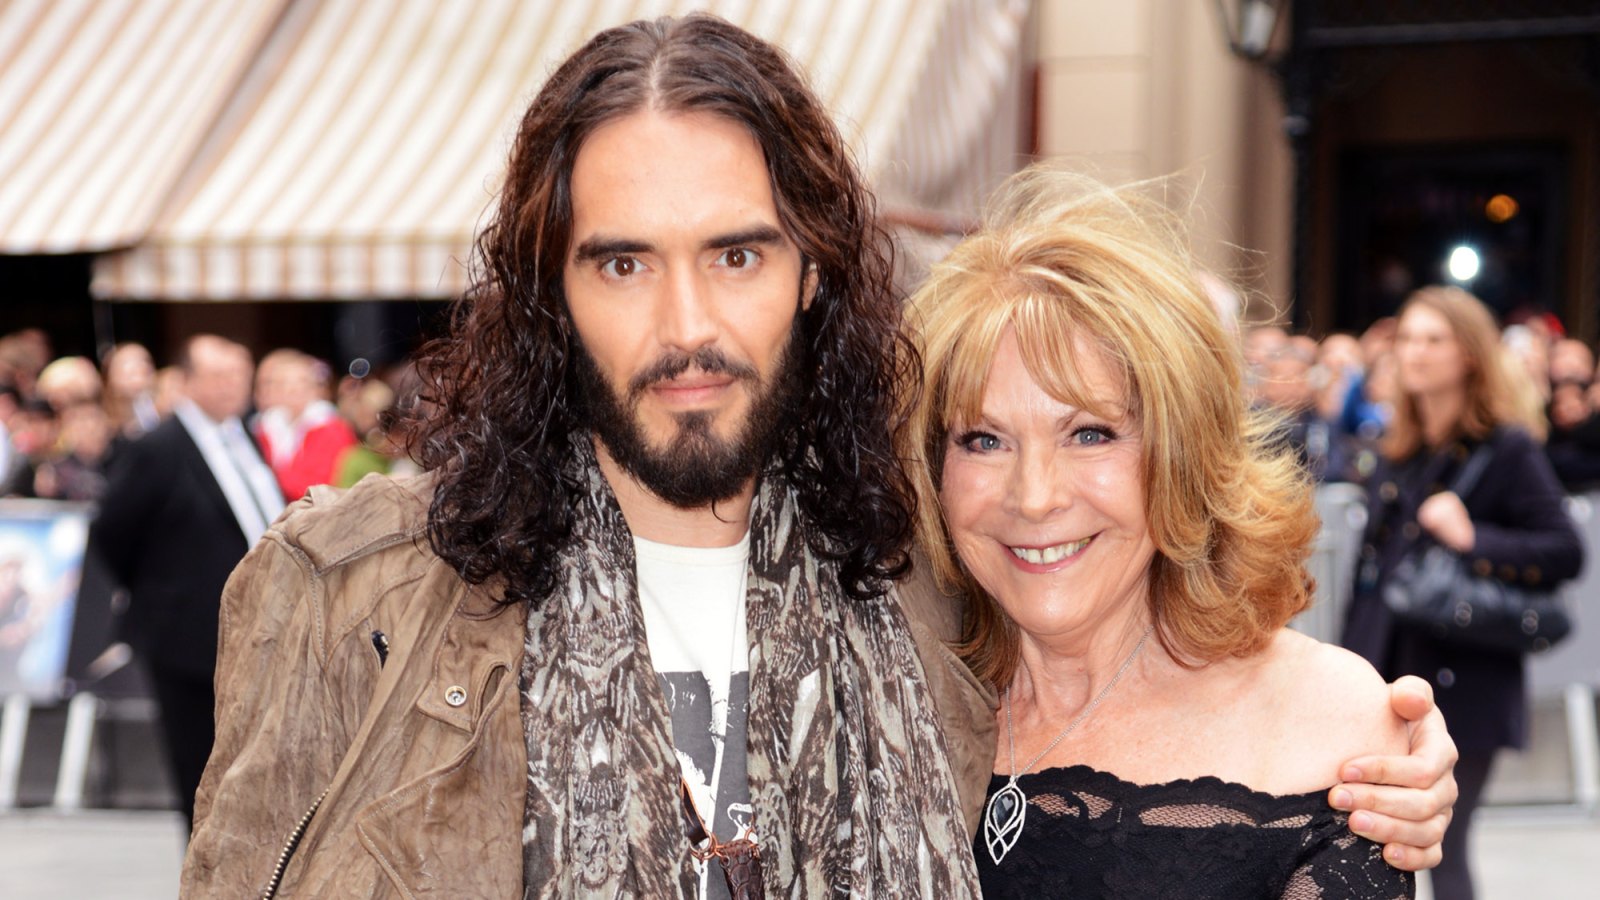 Russell Brand's Mom Suffers 'Life-Threatening Injuries' in Car Crash